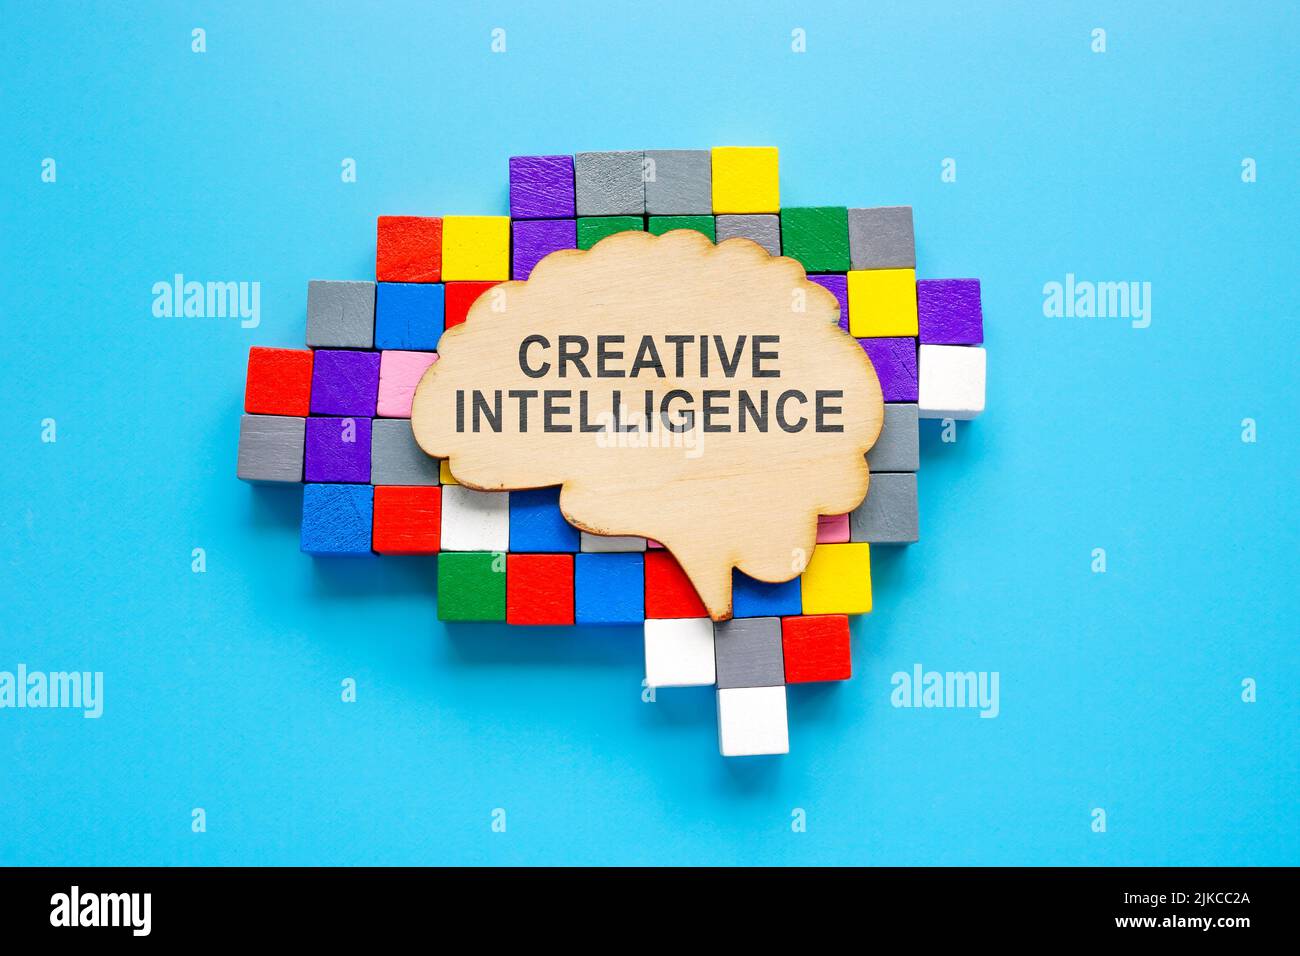 Creative intelligence concept. Brain from wood and colorful cubes. Stock Photo